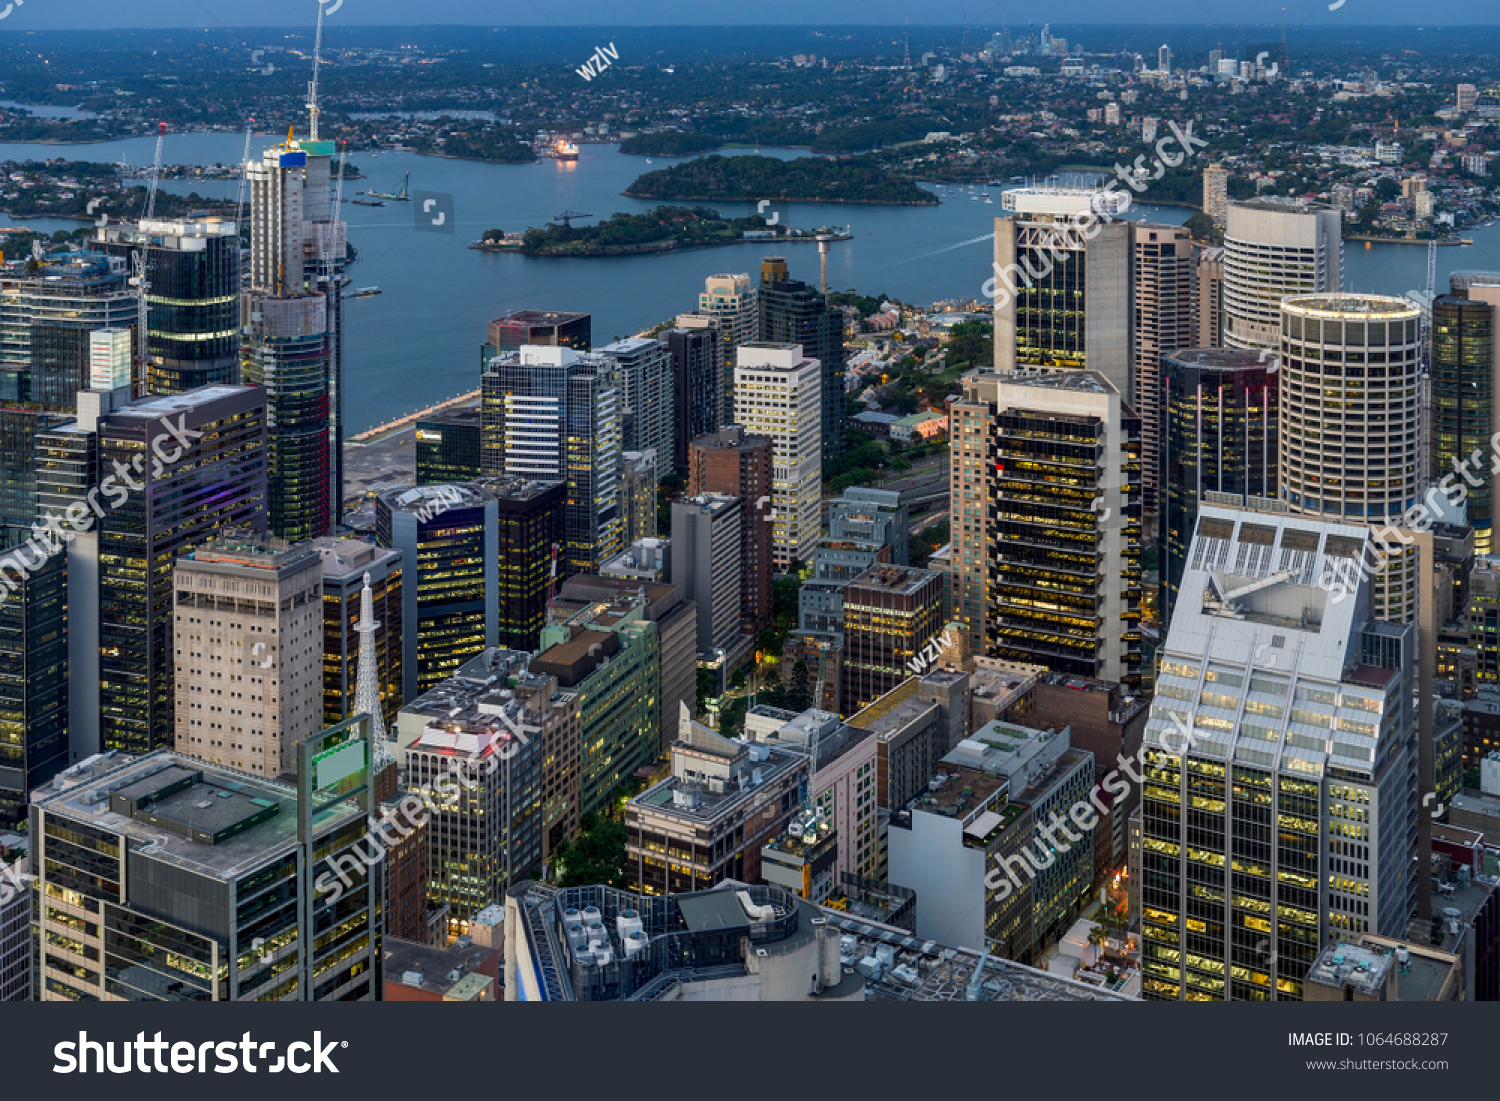 Night scene of Sydney central business district. #1064688287